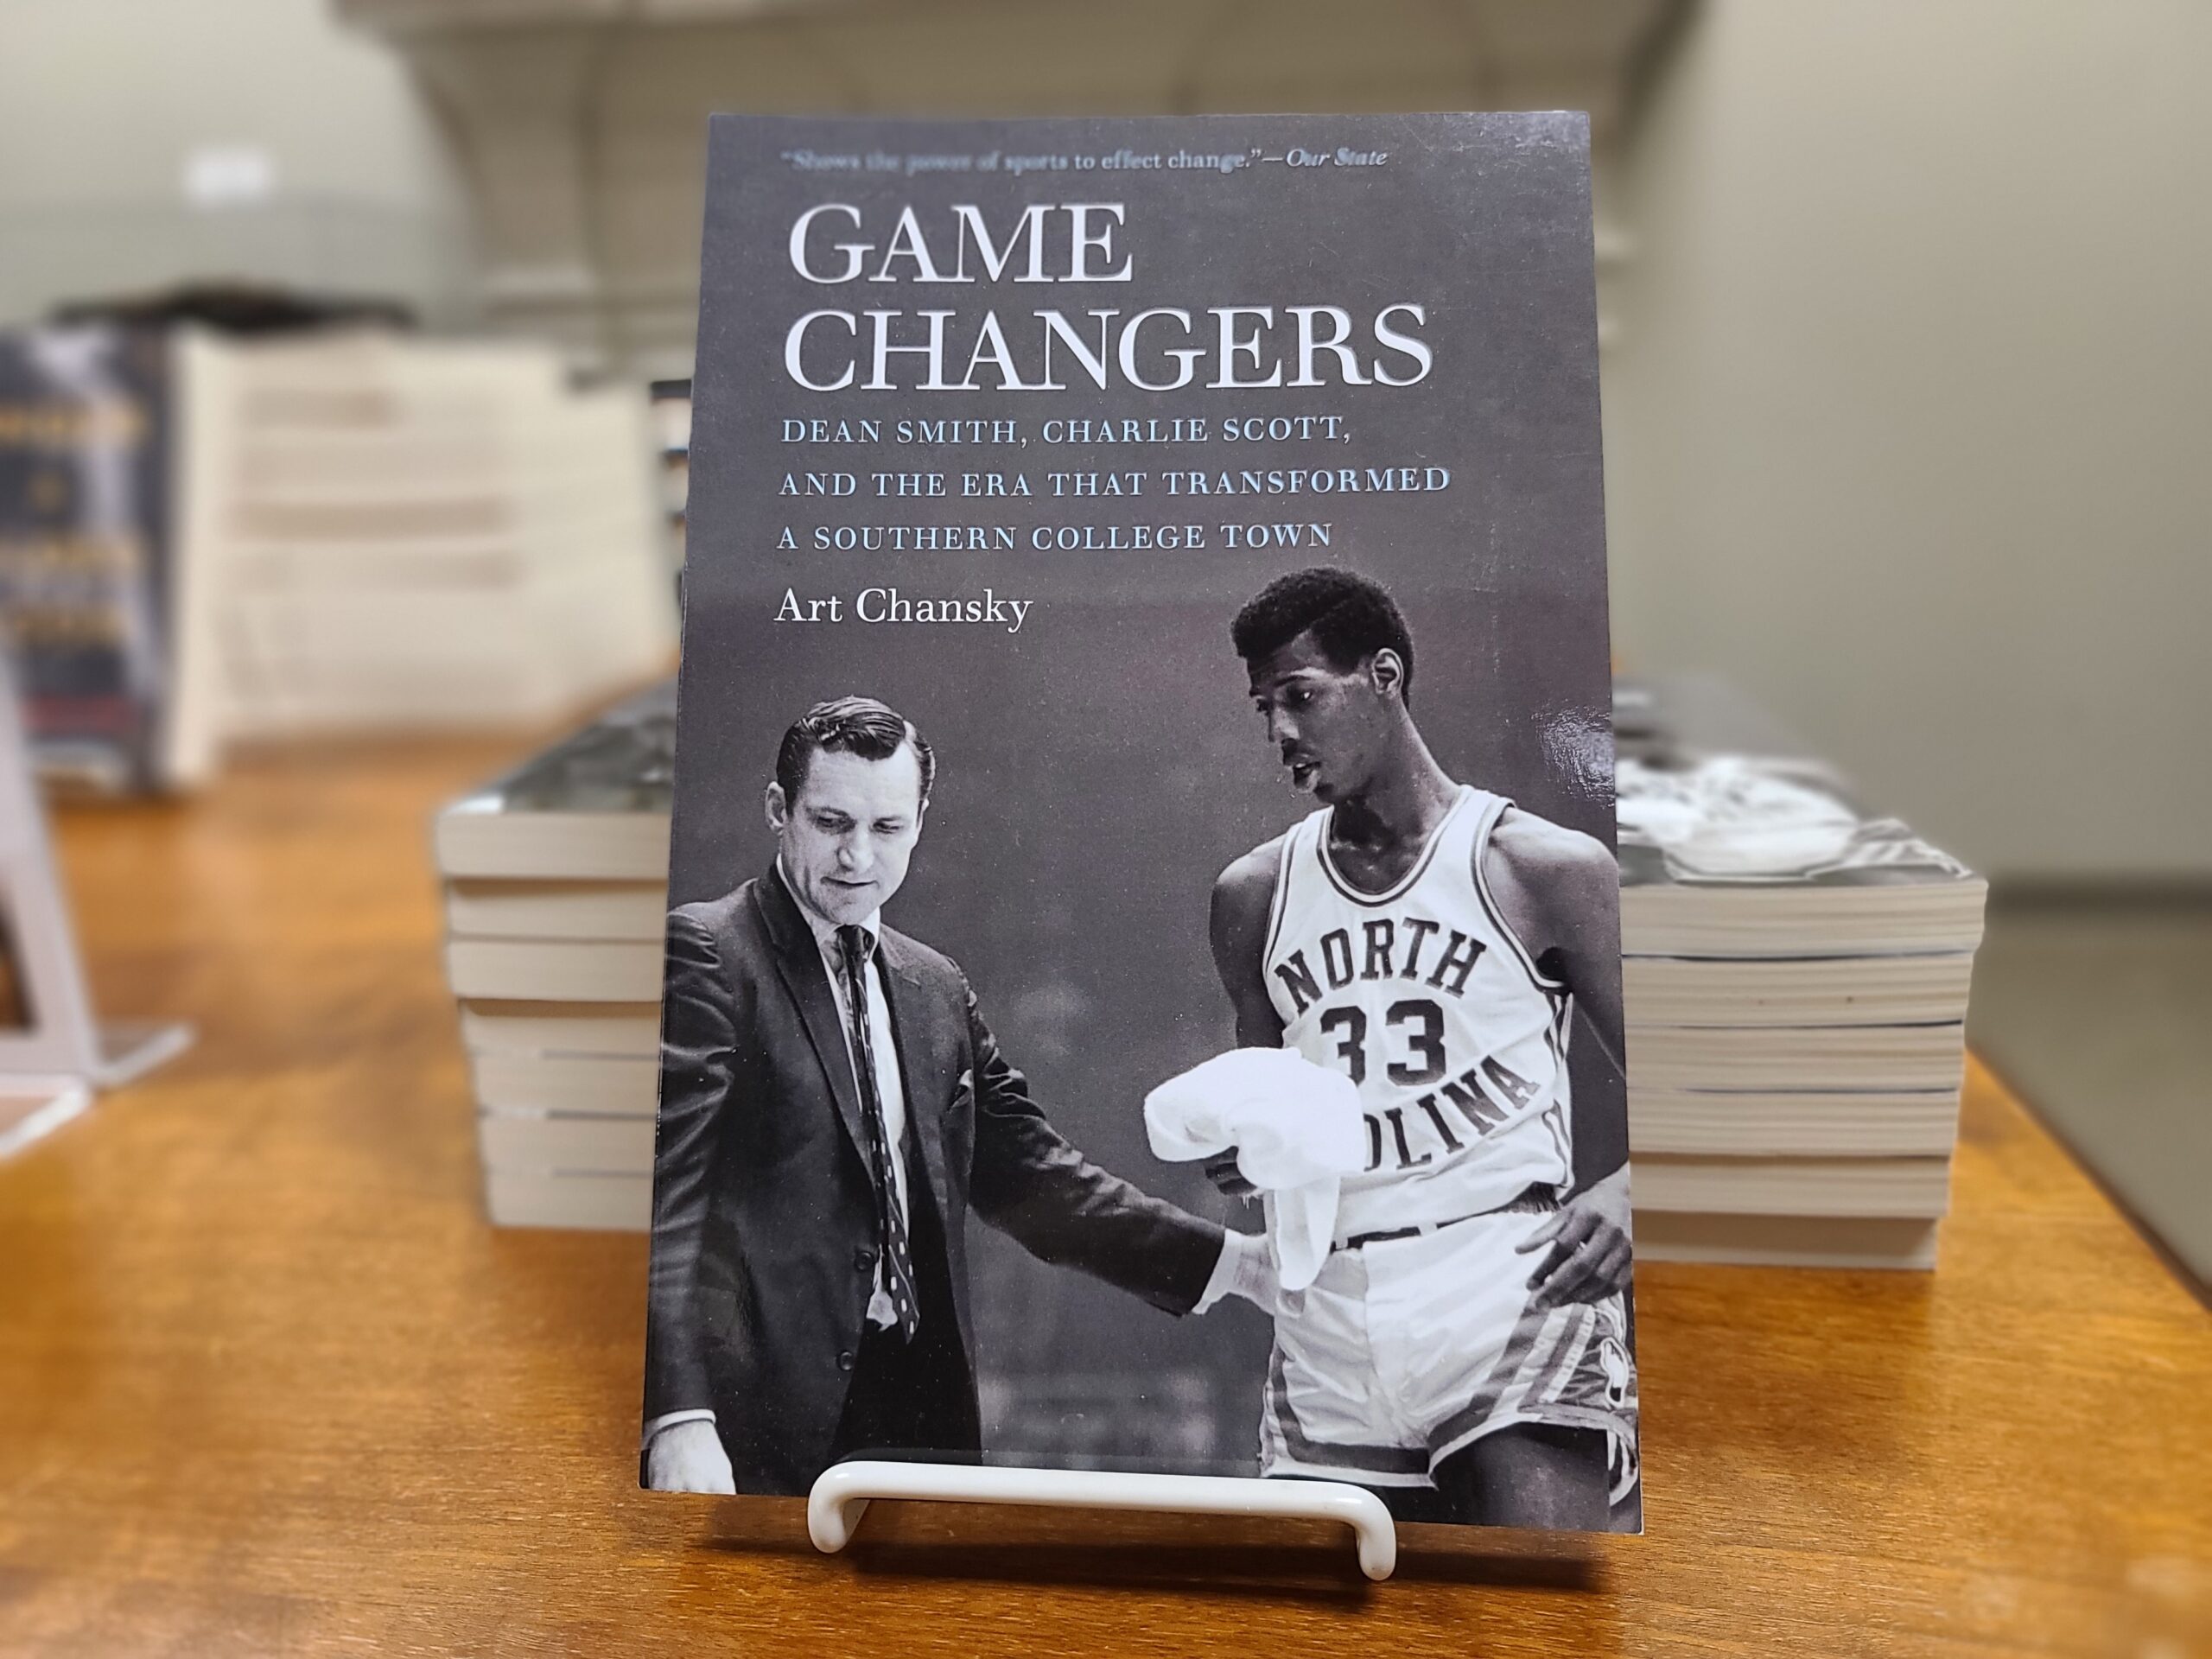 Game changers dean smith Art Chansky virtual book discussion